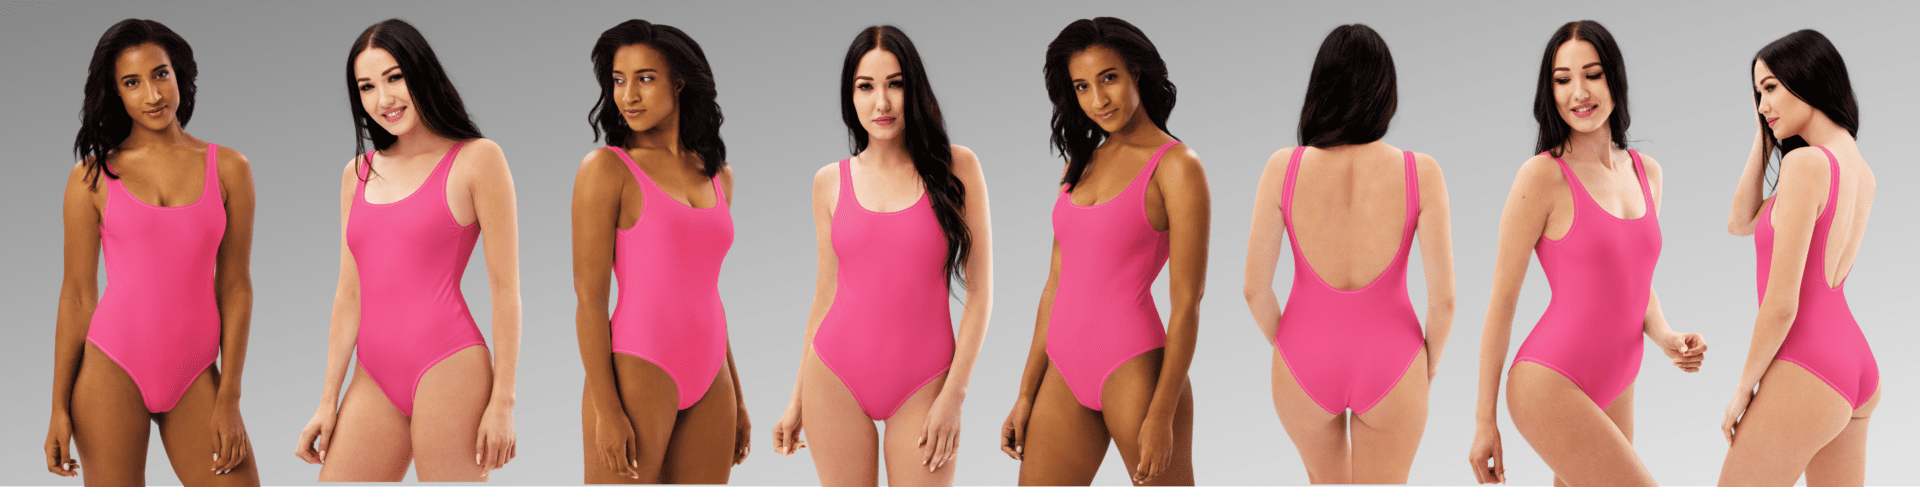 Seven women in pink one-piece swimsuits.